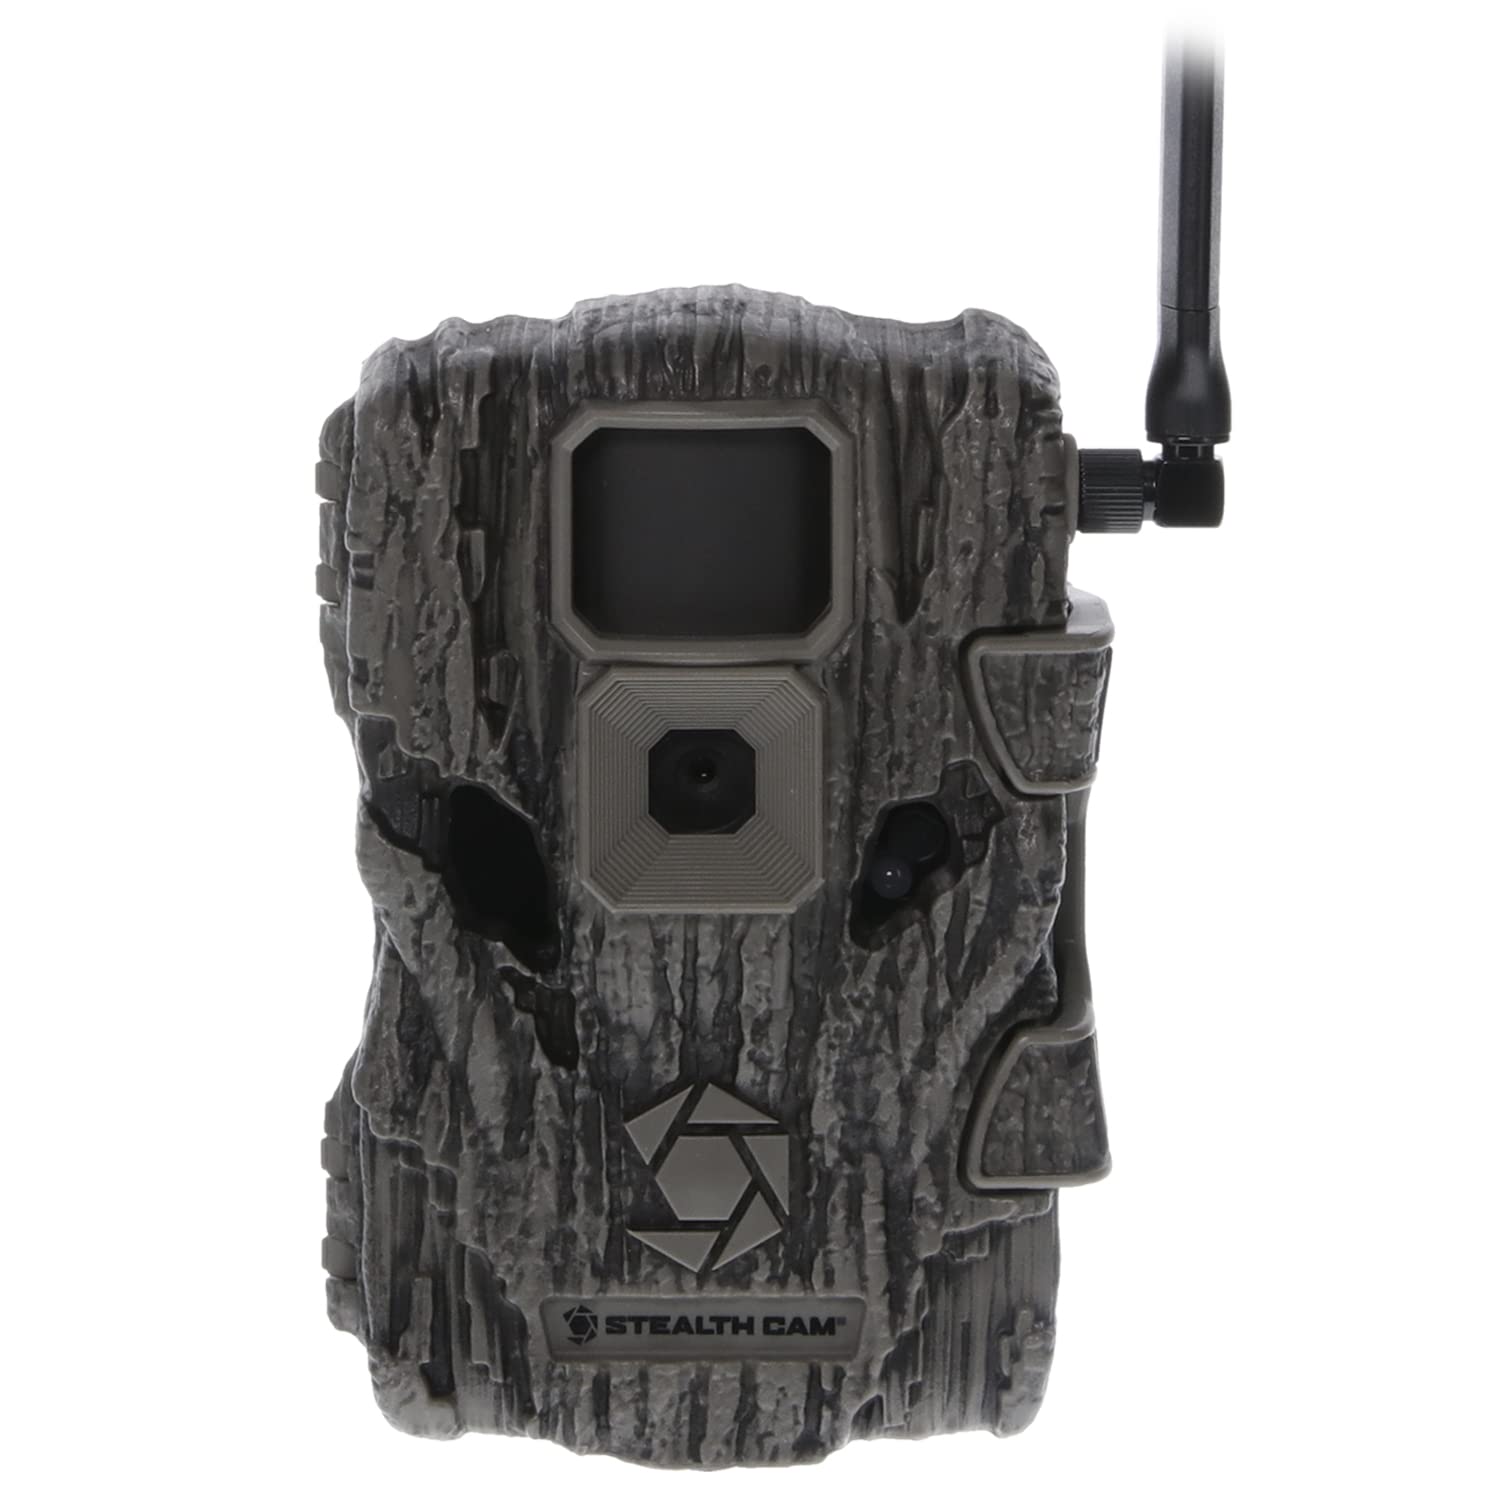 Stealth Cam Fusion X 26 MP Photo & 1080P at 30FPS Video 0.4 Sec Trigger Speed Wireless Hunting Trail Camera - Admite tarjetas SD de hasta 32 GB